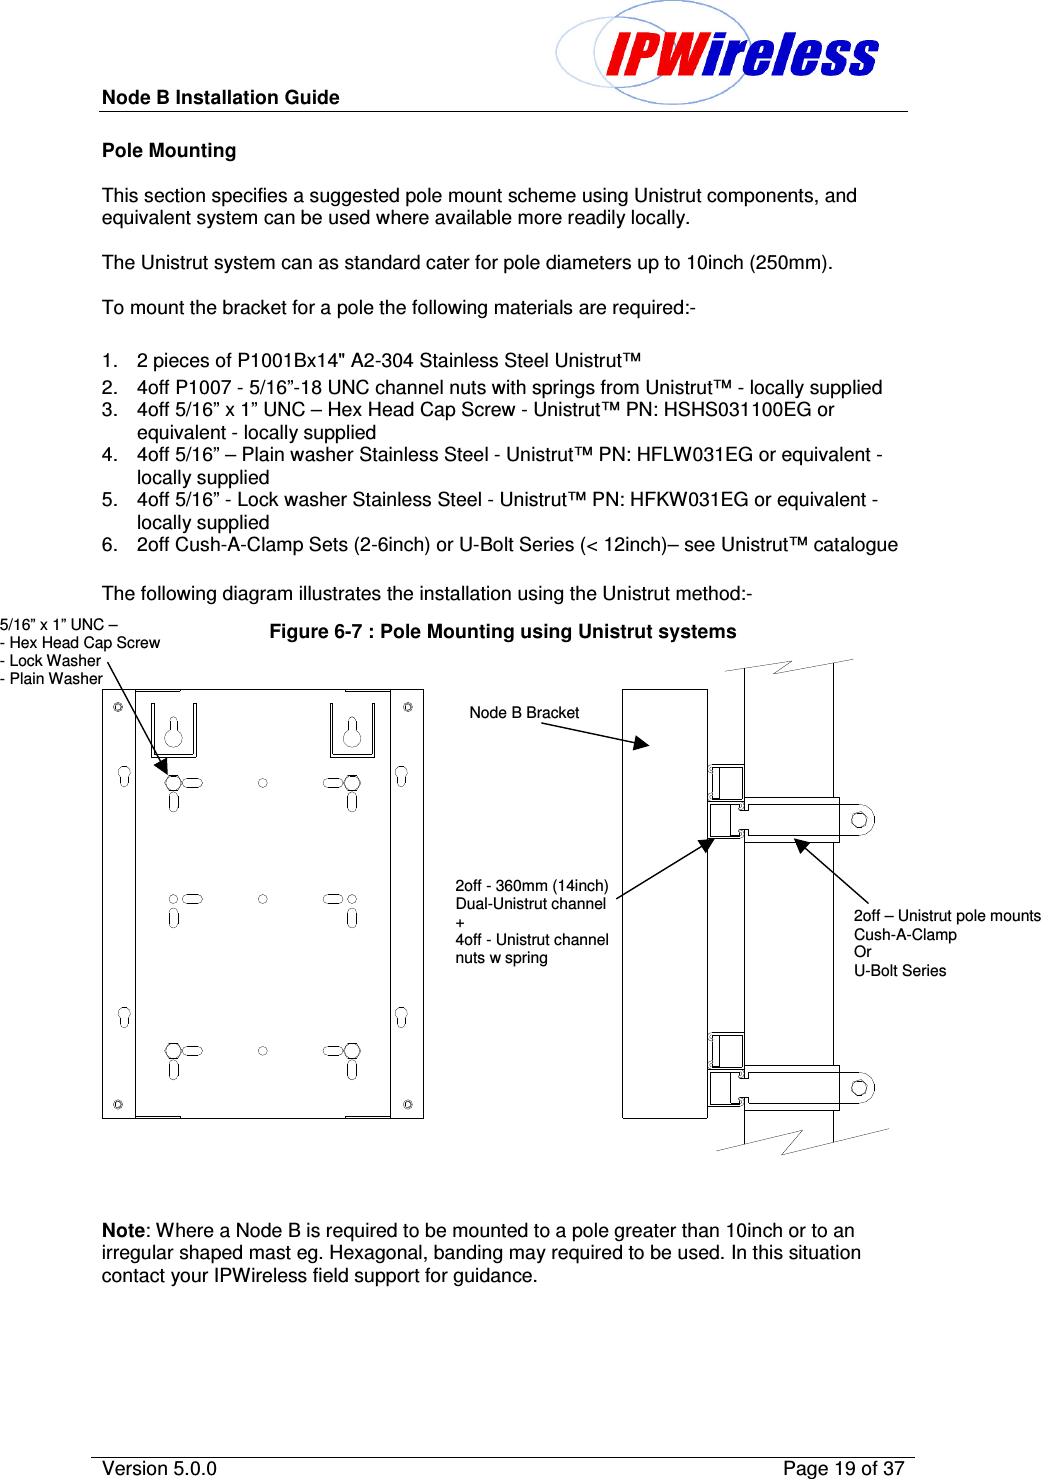 Node B Installation Guide                                              Version 5.0.0    Page 19 of 37  Pole Mounting  This section specifies a suggested pole mount scheme using Unistrut components, and equivalent system can be used where available more readily locally.  The Unistrut system can as standard cater for pole diameters up to 10inch (250mm).  To mount the bracket for a pole the following materials are required:-  1.  2 pieces of P1001Bx14&quot; A2-304 Stainless Steel Unistrut™ 2.  4off P1007 - 5/16”-18 UNC channel nuts with springs from Unistrut™ - locally supplied  3.  4off 5/16” x 1” UNC – Hex Head Cap Screw - Unistrut™ PN: HSHS031100EG or equivalent - locally supplied 4.  4off 5/16” – Plain washer Stainless Steel - Unistrut™ PN: HFLW031EG or equivalent - locally supplied 5.  4off 5/16” - Lock washer Stainless Steel - Unistrut™ PN: HFKW031EG or equivalent - locally supplied 6.  2off Cush-A-Clamp Sets (2-6inch) or U-Bolt Series (&lt; 12inch)– see Unistrut™ catalogue  The following diagram illustrates the installation using the Unistrut method:- Figure 6-7 : Pole Mounting using Unistrut systems    Note: Where a Node B is required to be mounted to a pole greater than 10inch or to an irregular shaped mast eg. Hexagonal, banding may required to be used. In this situation contact your IPWireless field support for guidance.  Node B Bracket  2off - 360mm (14inch)  Dual-Unistrut channel + 4off - Unistrut channel nuts w spring   2off – Unistrut pole mounts Cush-A-Clamp  Or U-Bolt Series 5/16” x 1” UNC –  - Hex Head Cap Screw - Lock Washer - Plain Washer 